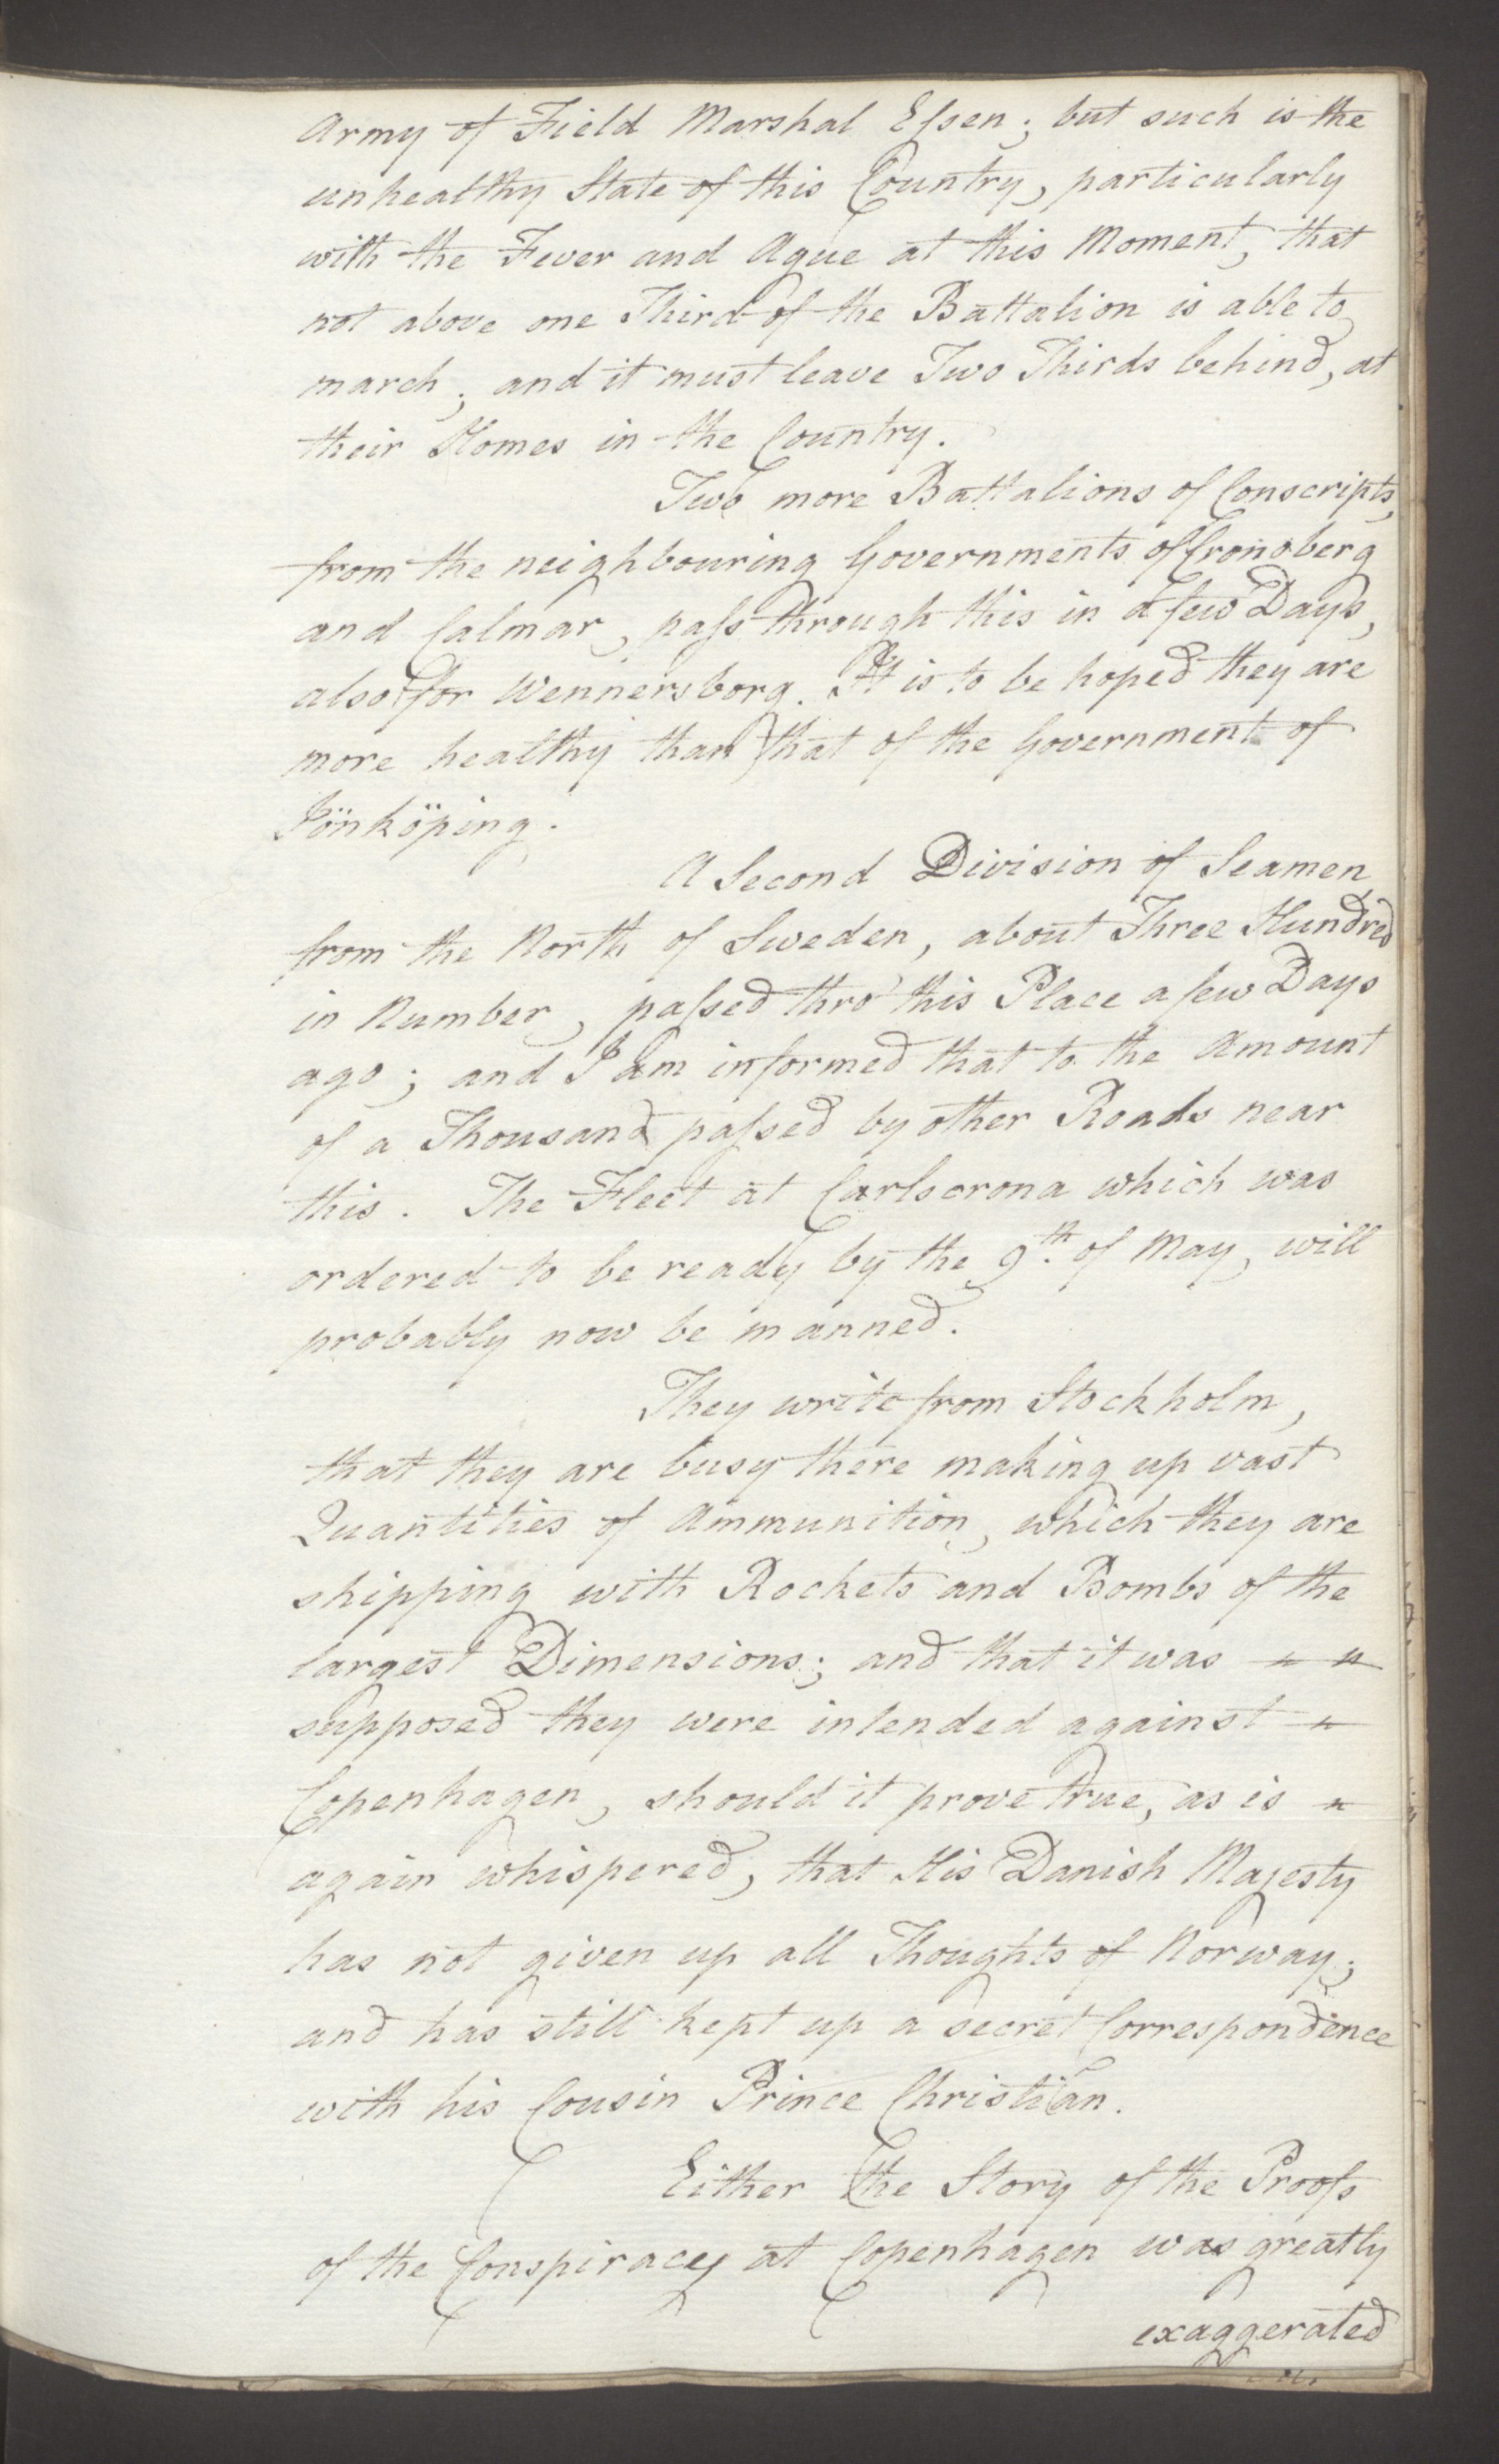 Foreign Office*, UKA/-/FO 38/16: Sir C. Gordon. Reports from Malmö, Jonkoping, and Helsingborg, 1814, s. 47